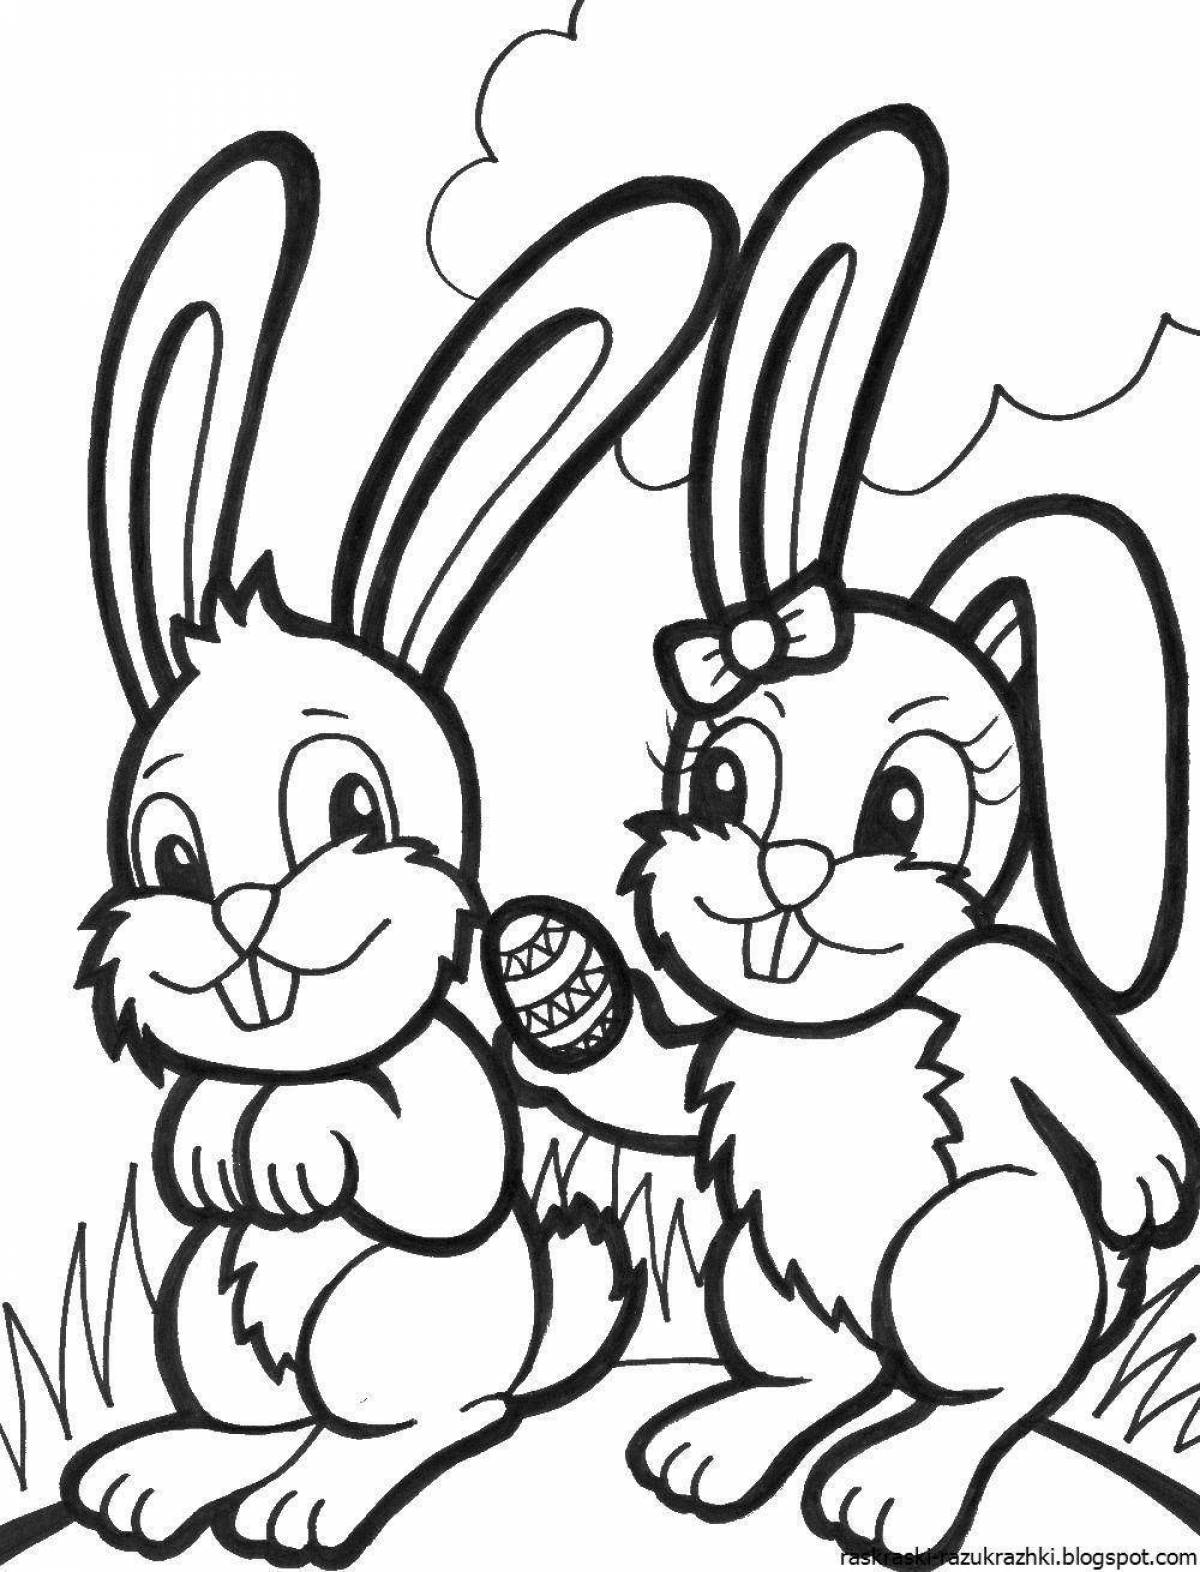 Naughty rabbit and cat coloring page